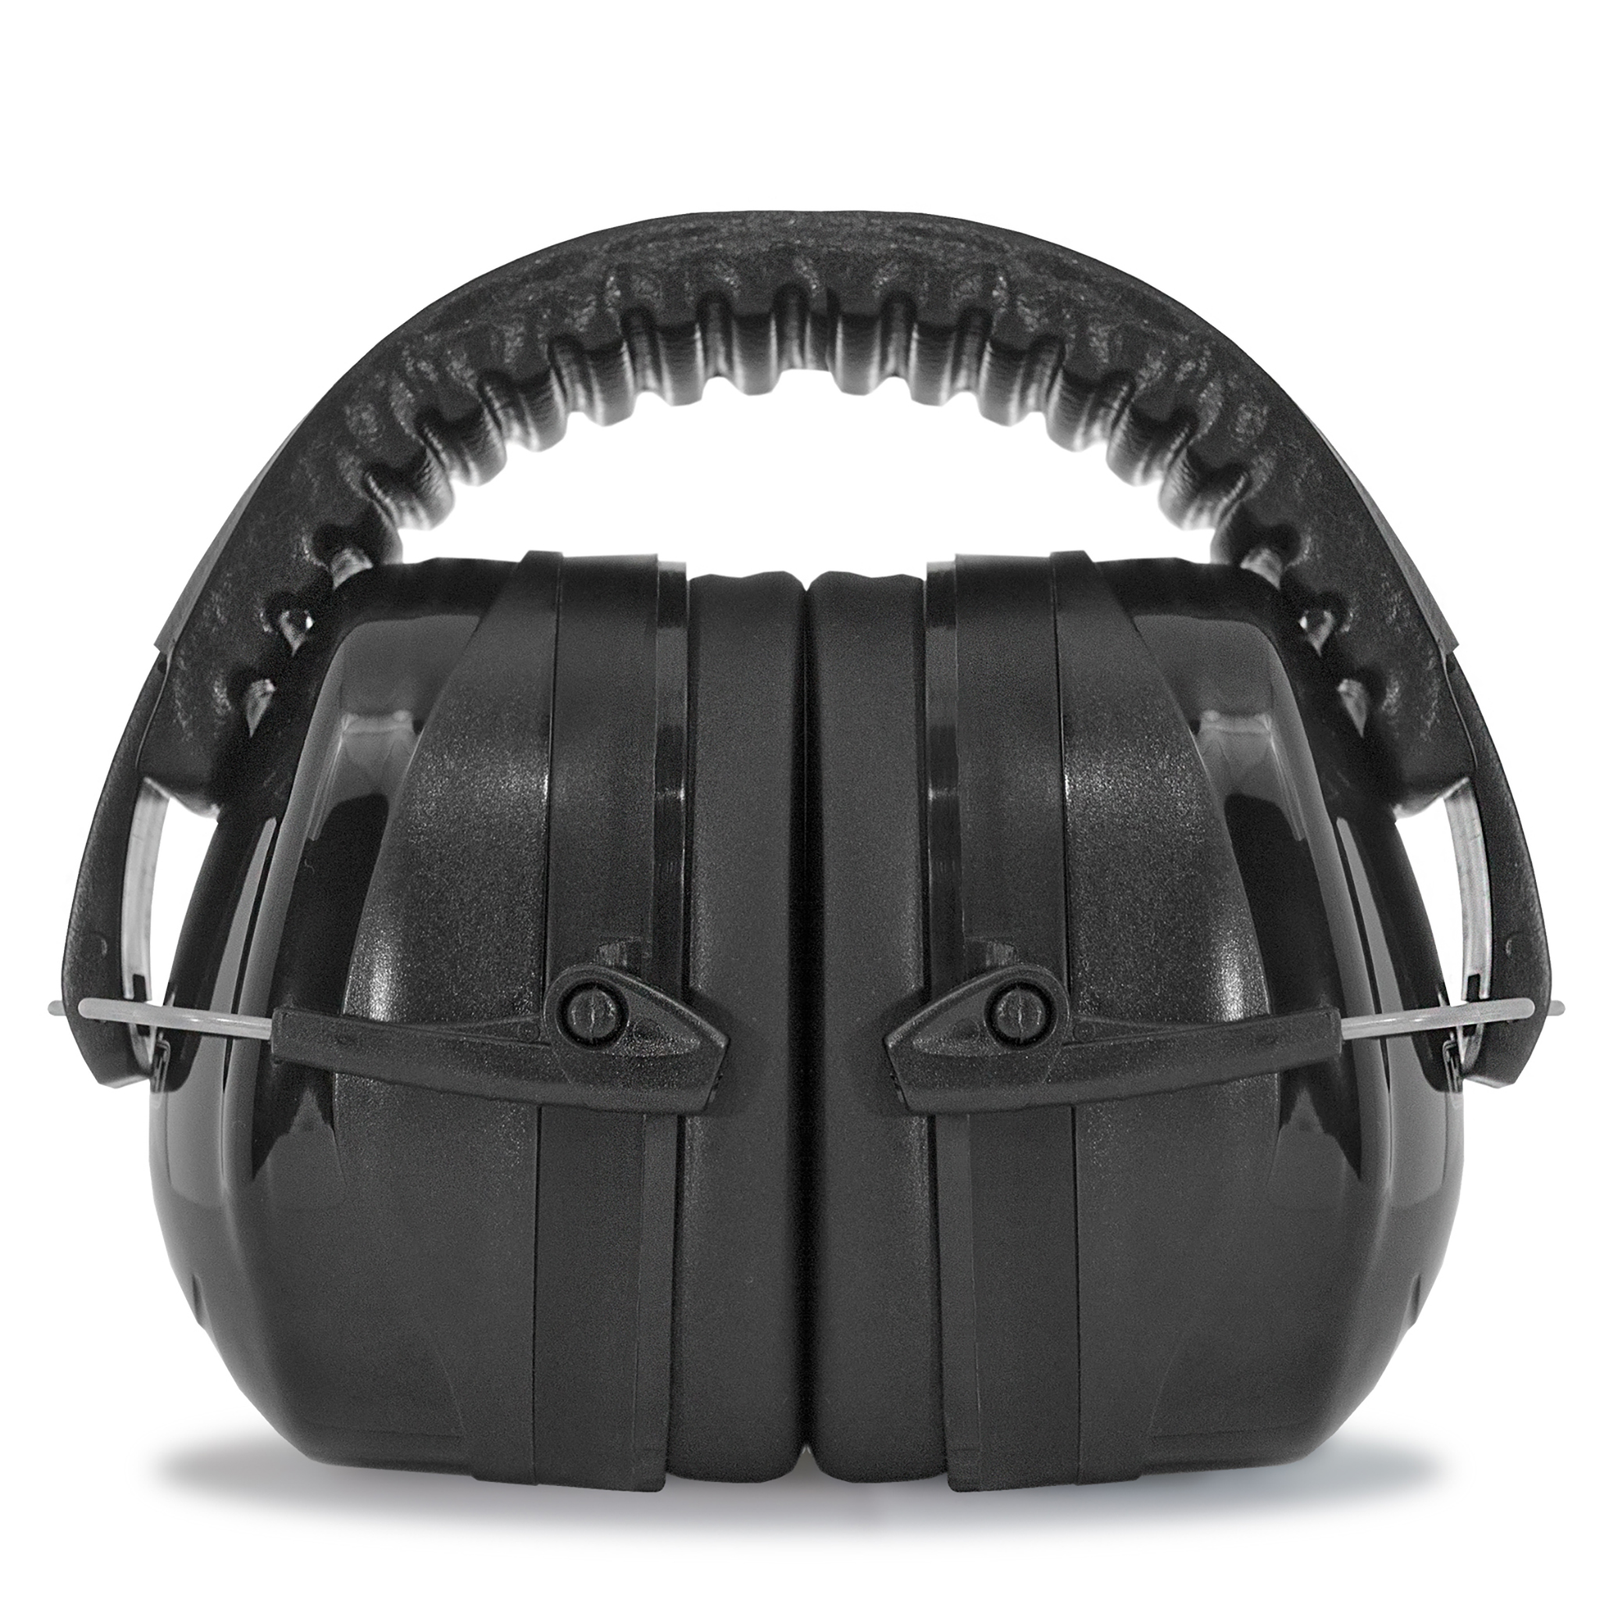 Front view of the 27DB NRR noise cancelling JORESTECH black earmuff